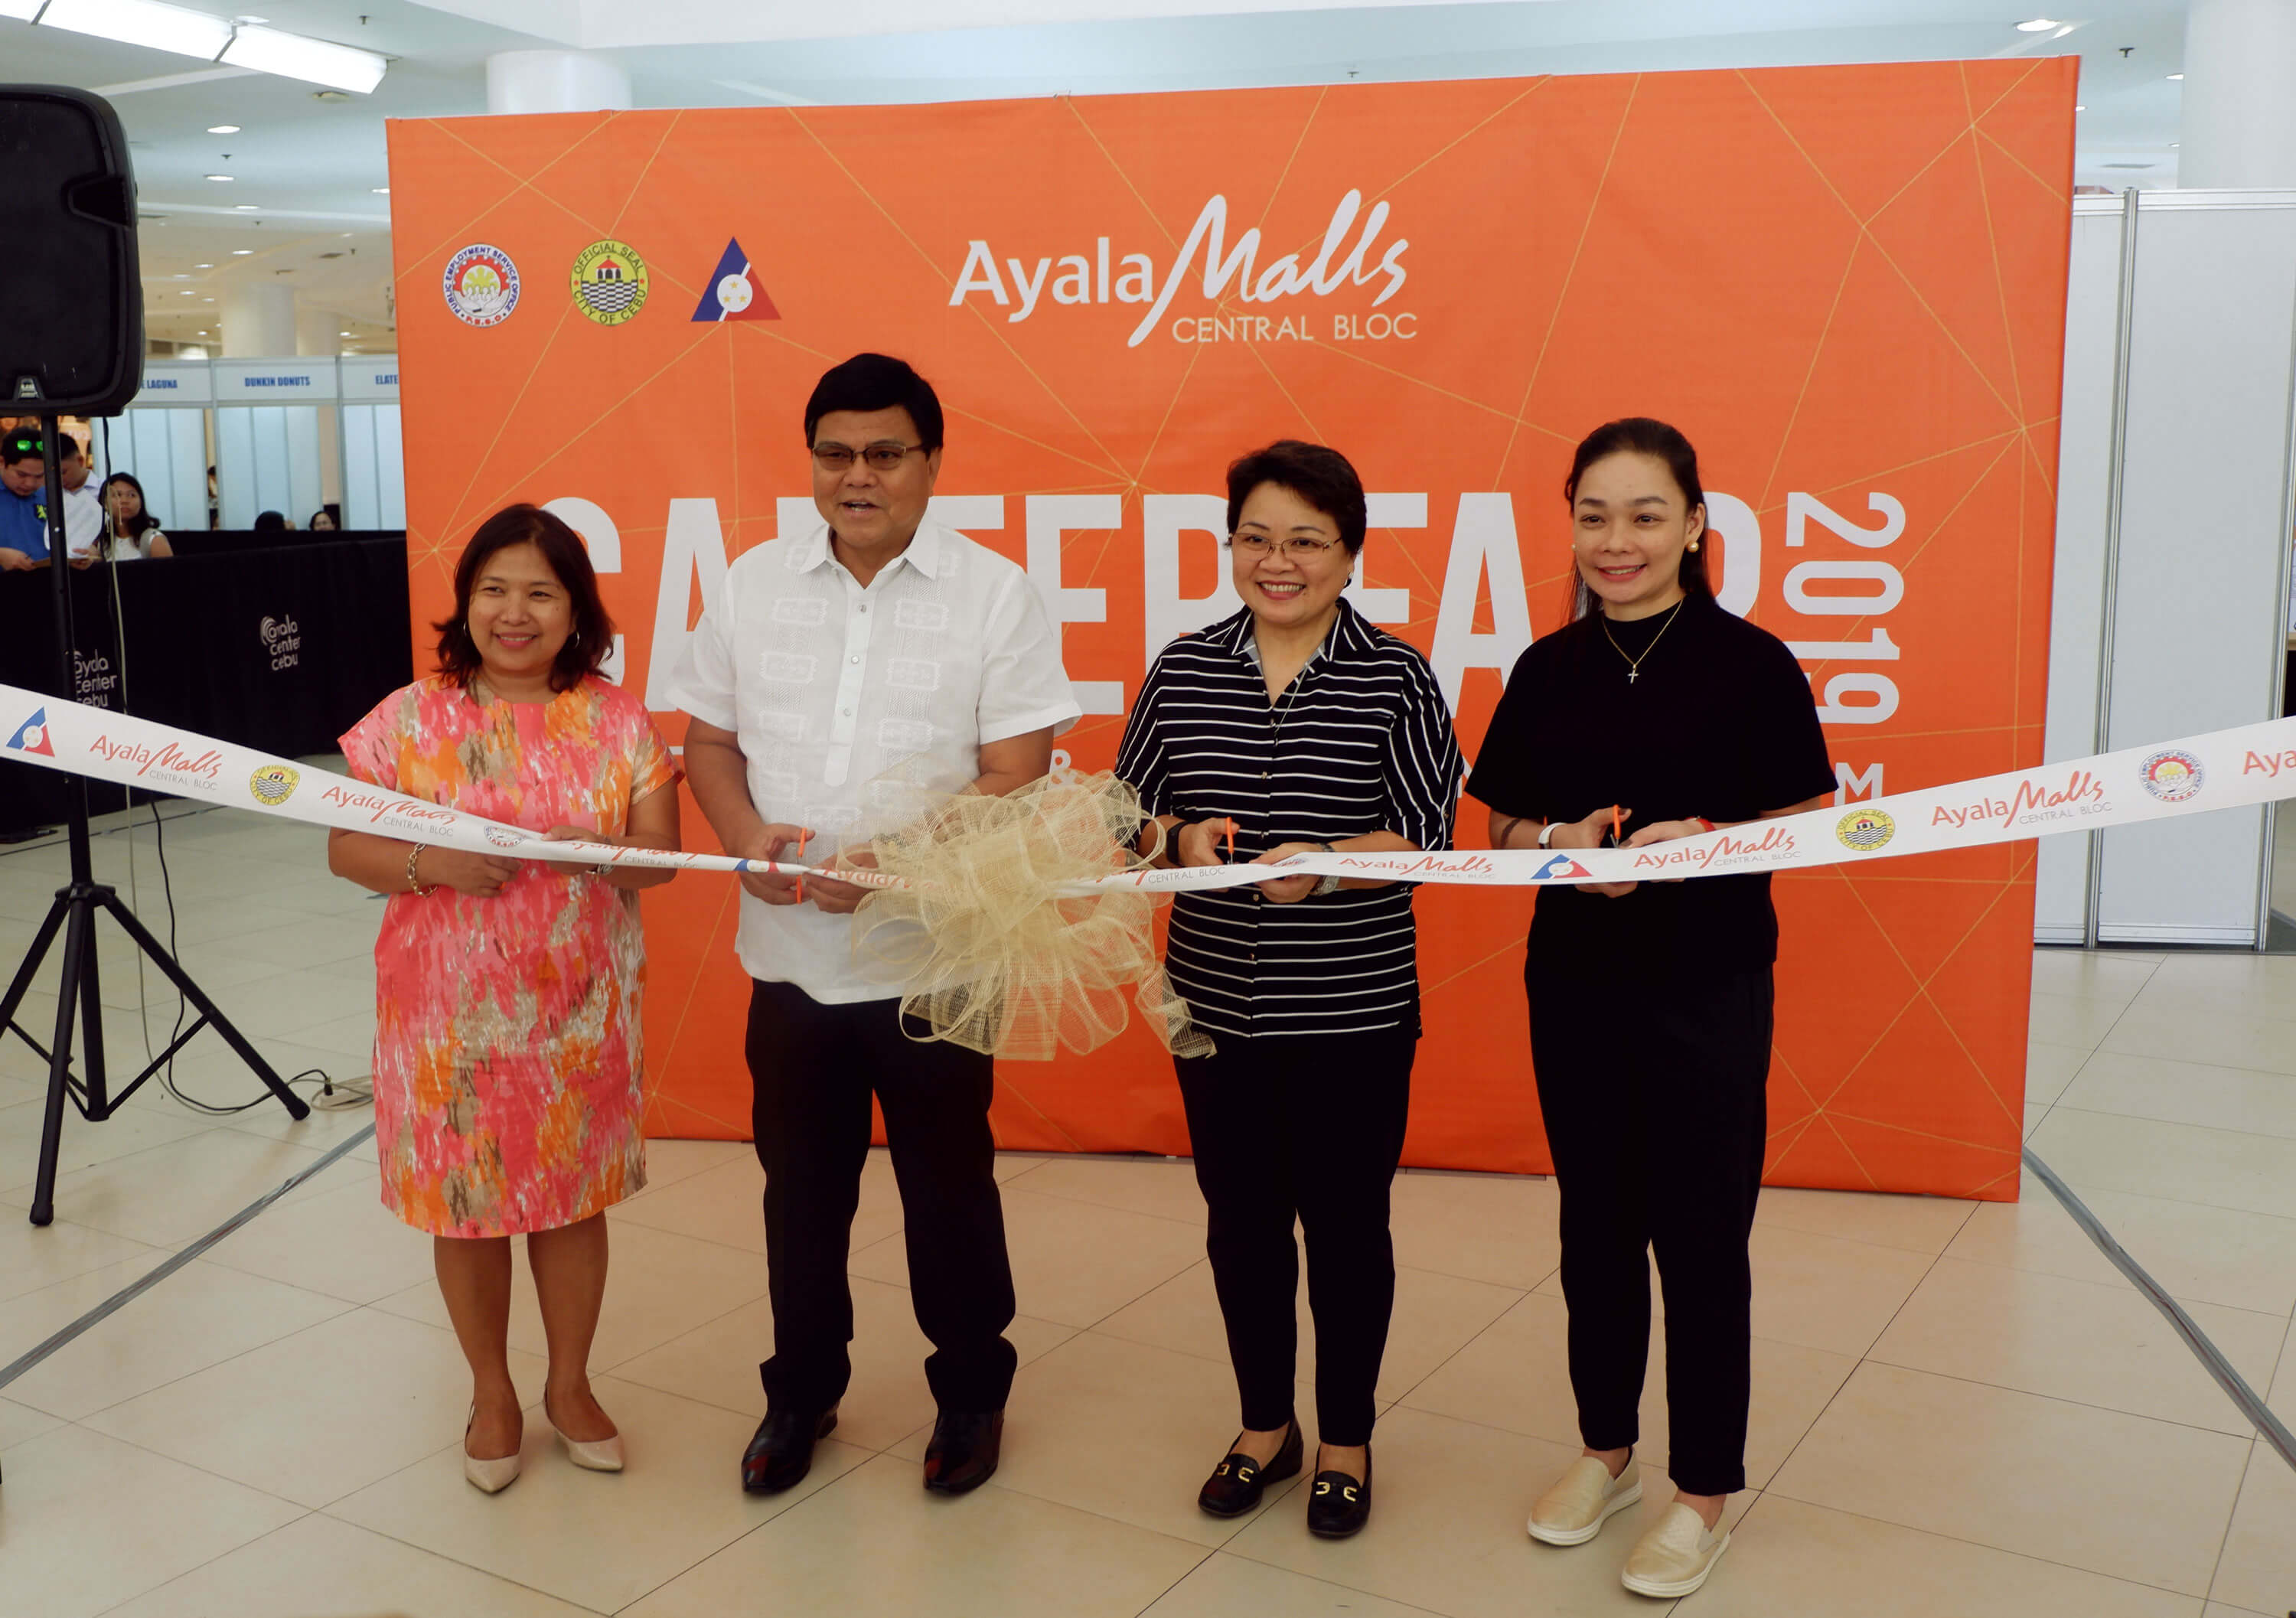 CAREER FAIR OPENING. Cebu City Mayor Edgardo Labella leads the opening of the jobs fair to sign up workers for the Ayala Malls Central Bloc. With Labella are (from left) Ayala Malls VisMin Head Clavel Tongco, Ayala Center Cebu General Manager Bong Dy, and Ayala Malls Central Bloc Operations Manager Mabel Peñas. The career fair will be held from October 7 to 8 at the Activity Center of Ayala Center Cebu.